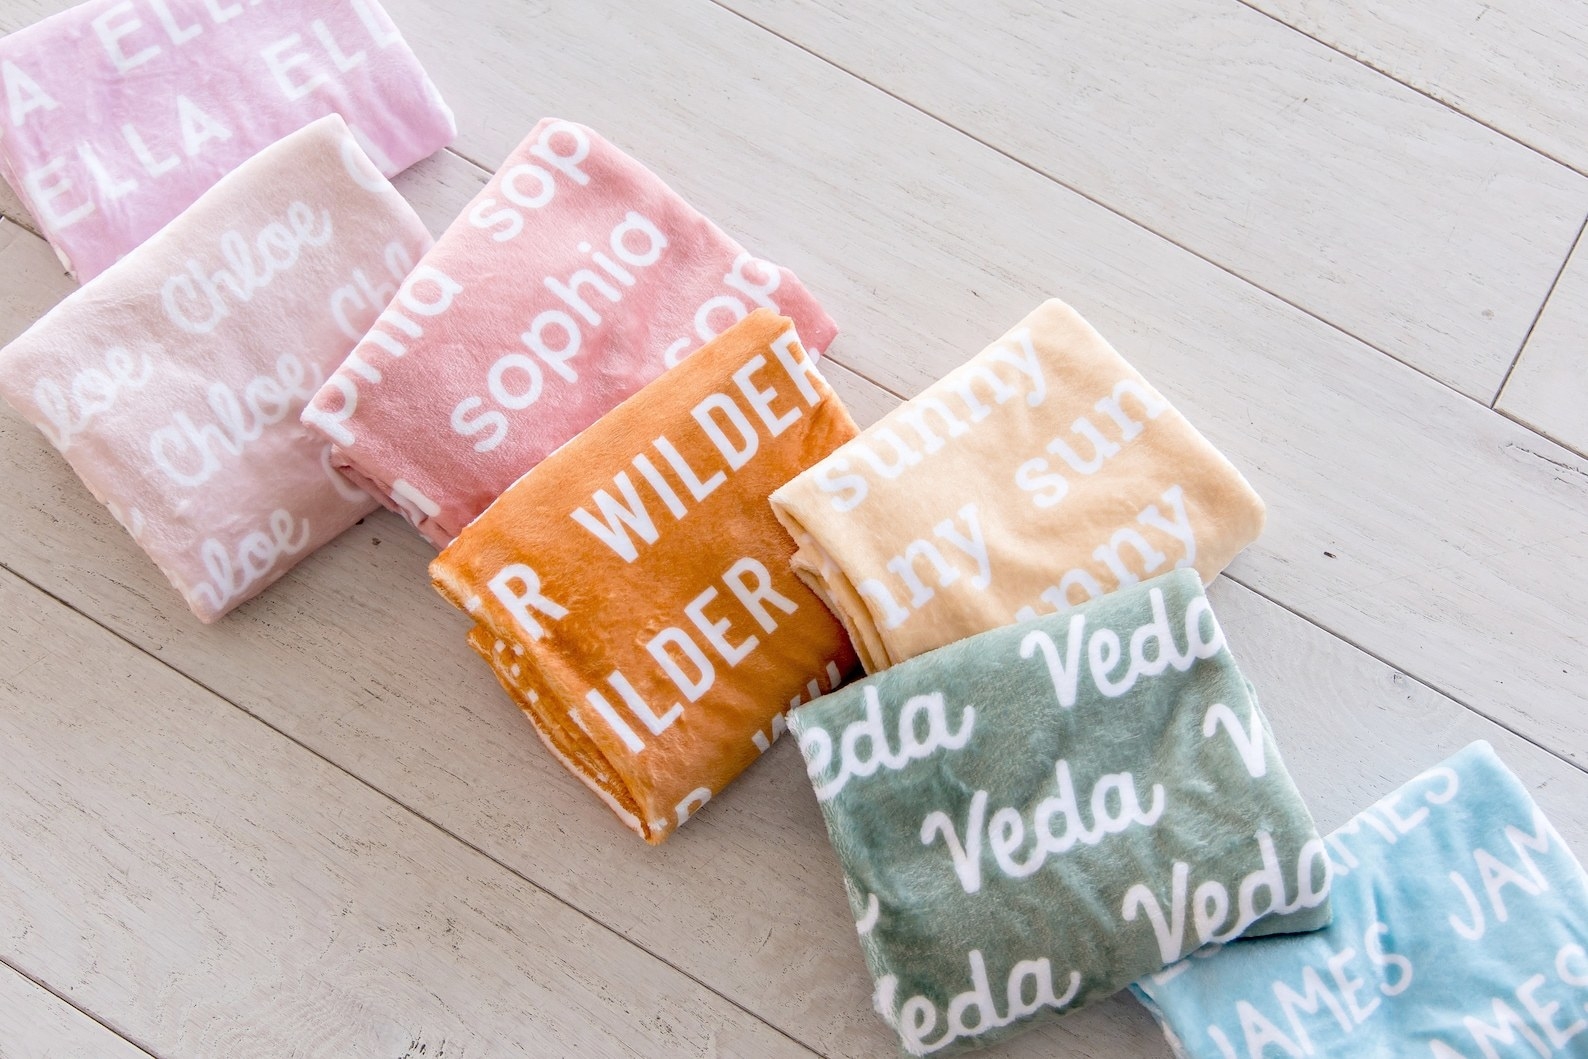 The personalized name blankets in seven different colors